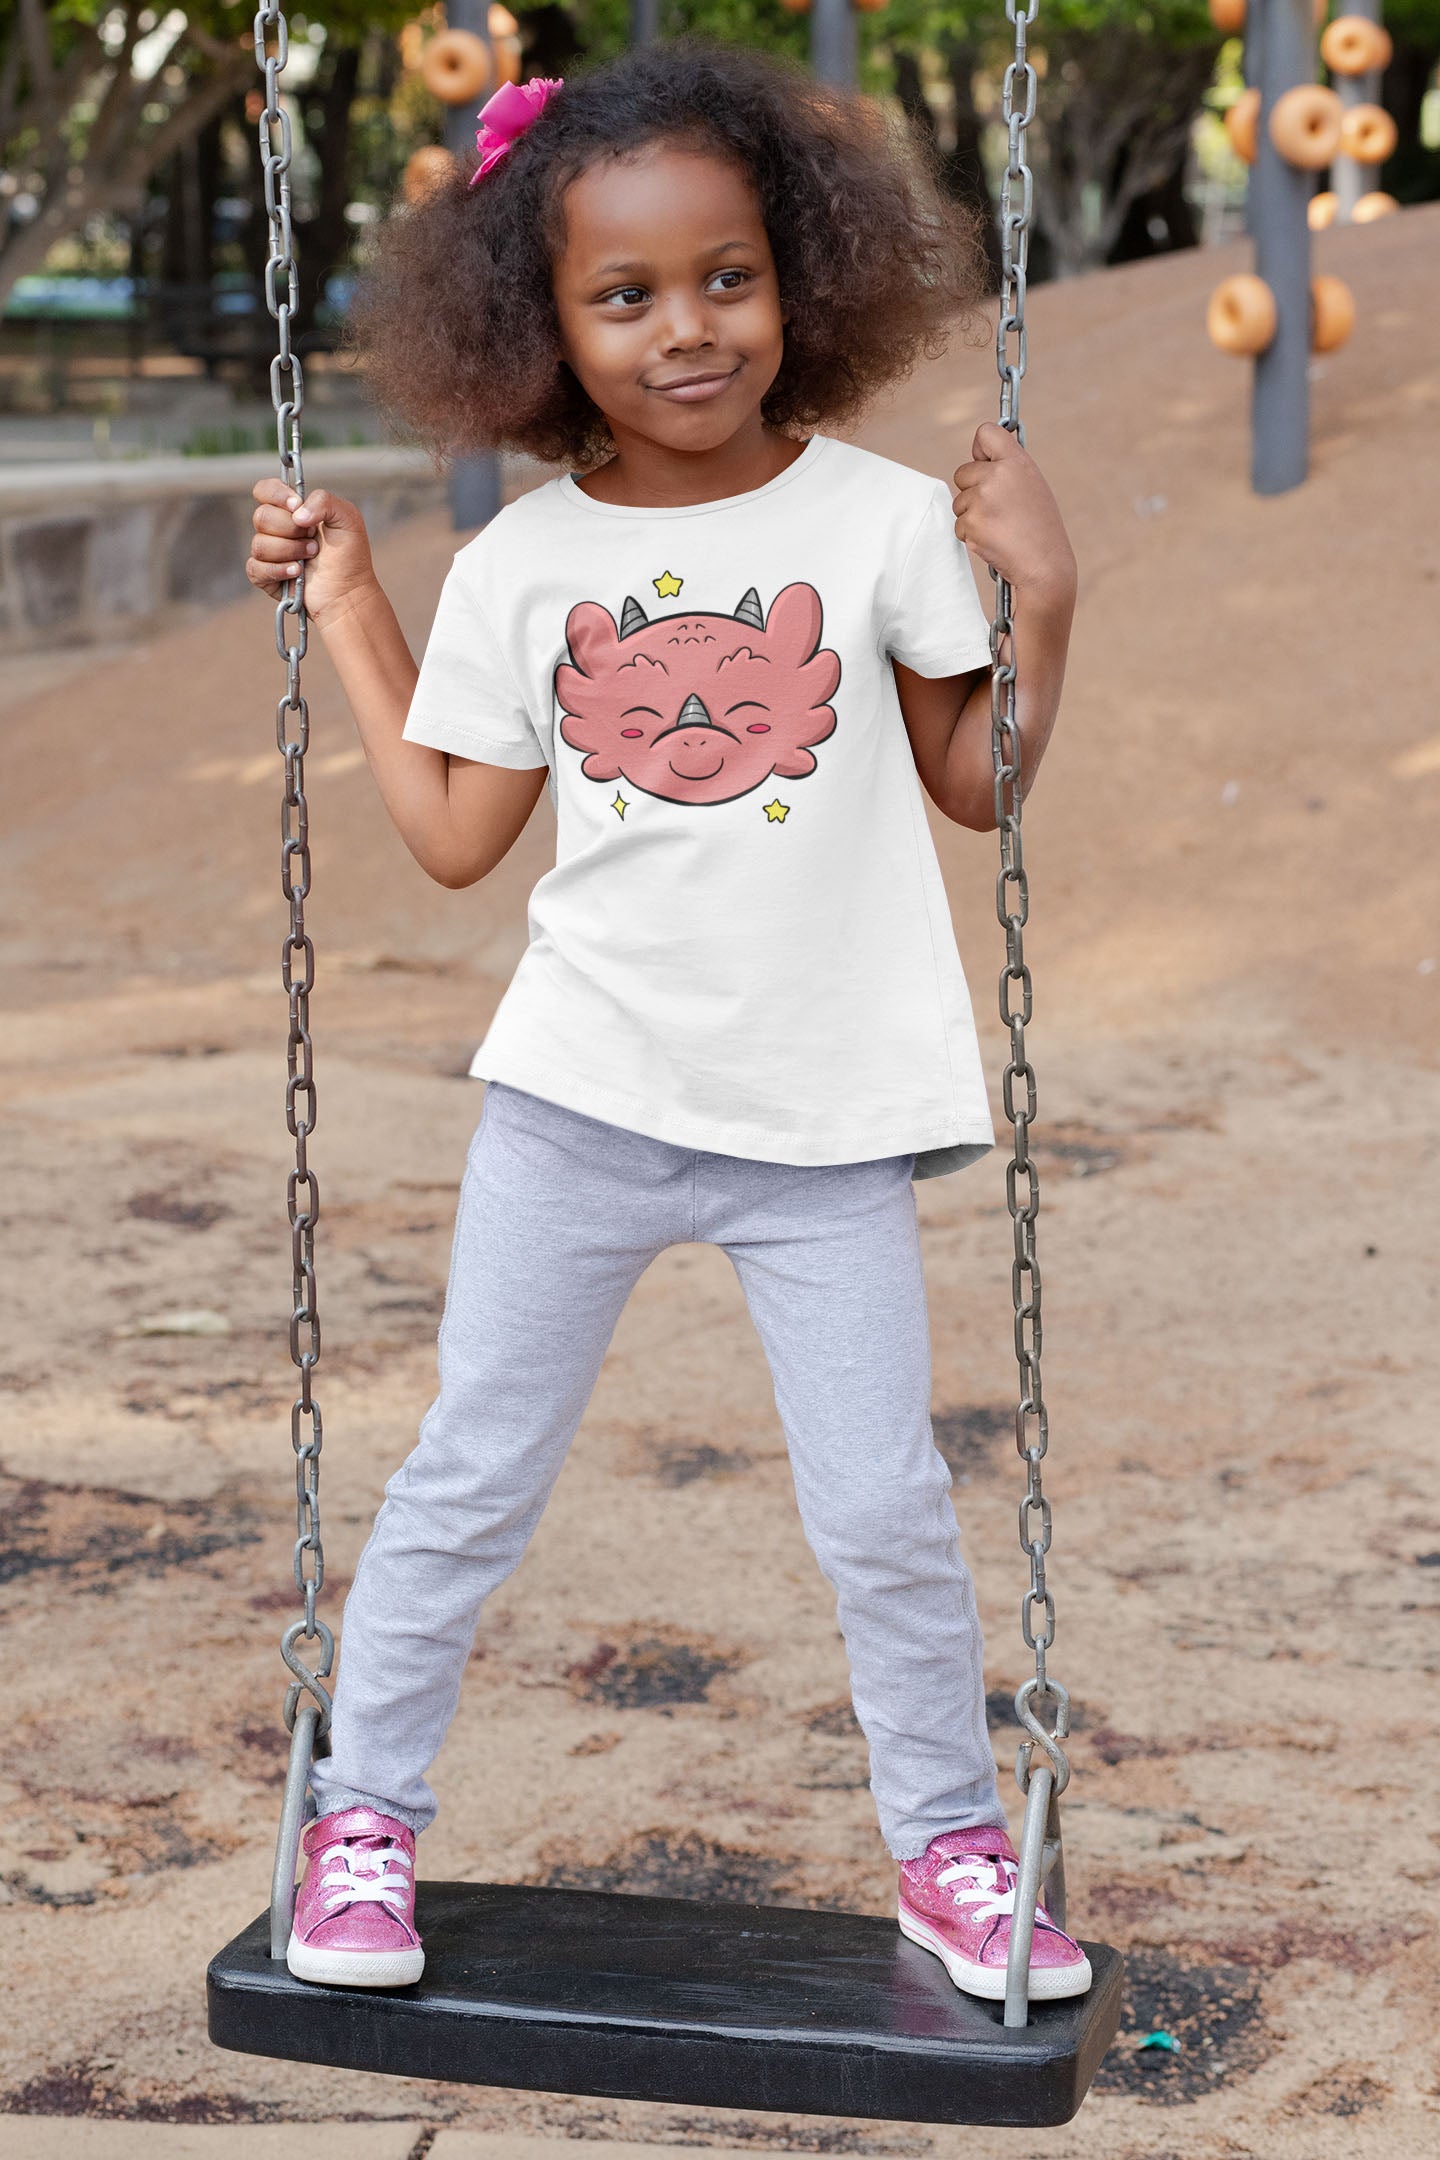 Happy Dragon - Emotion T-Shirts - Colors (Youth Sizes)